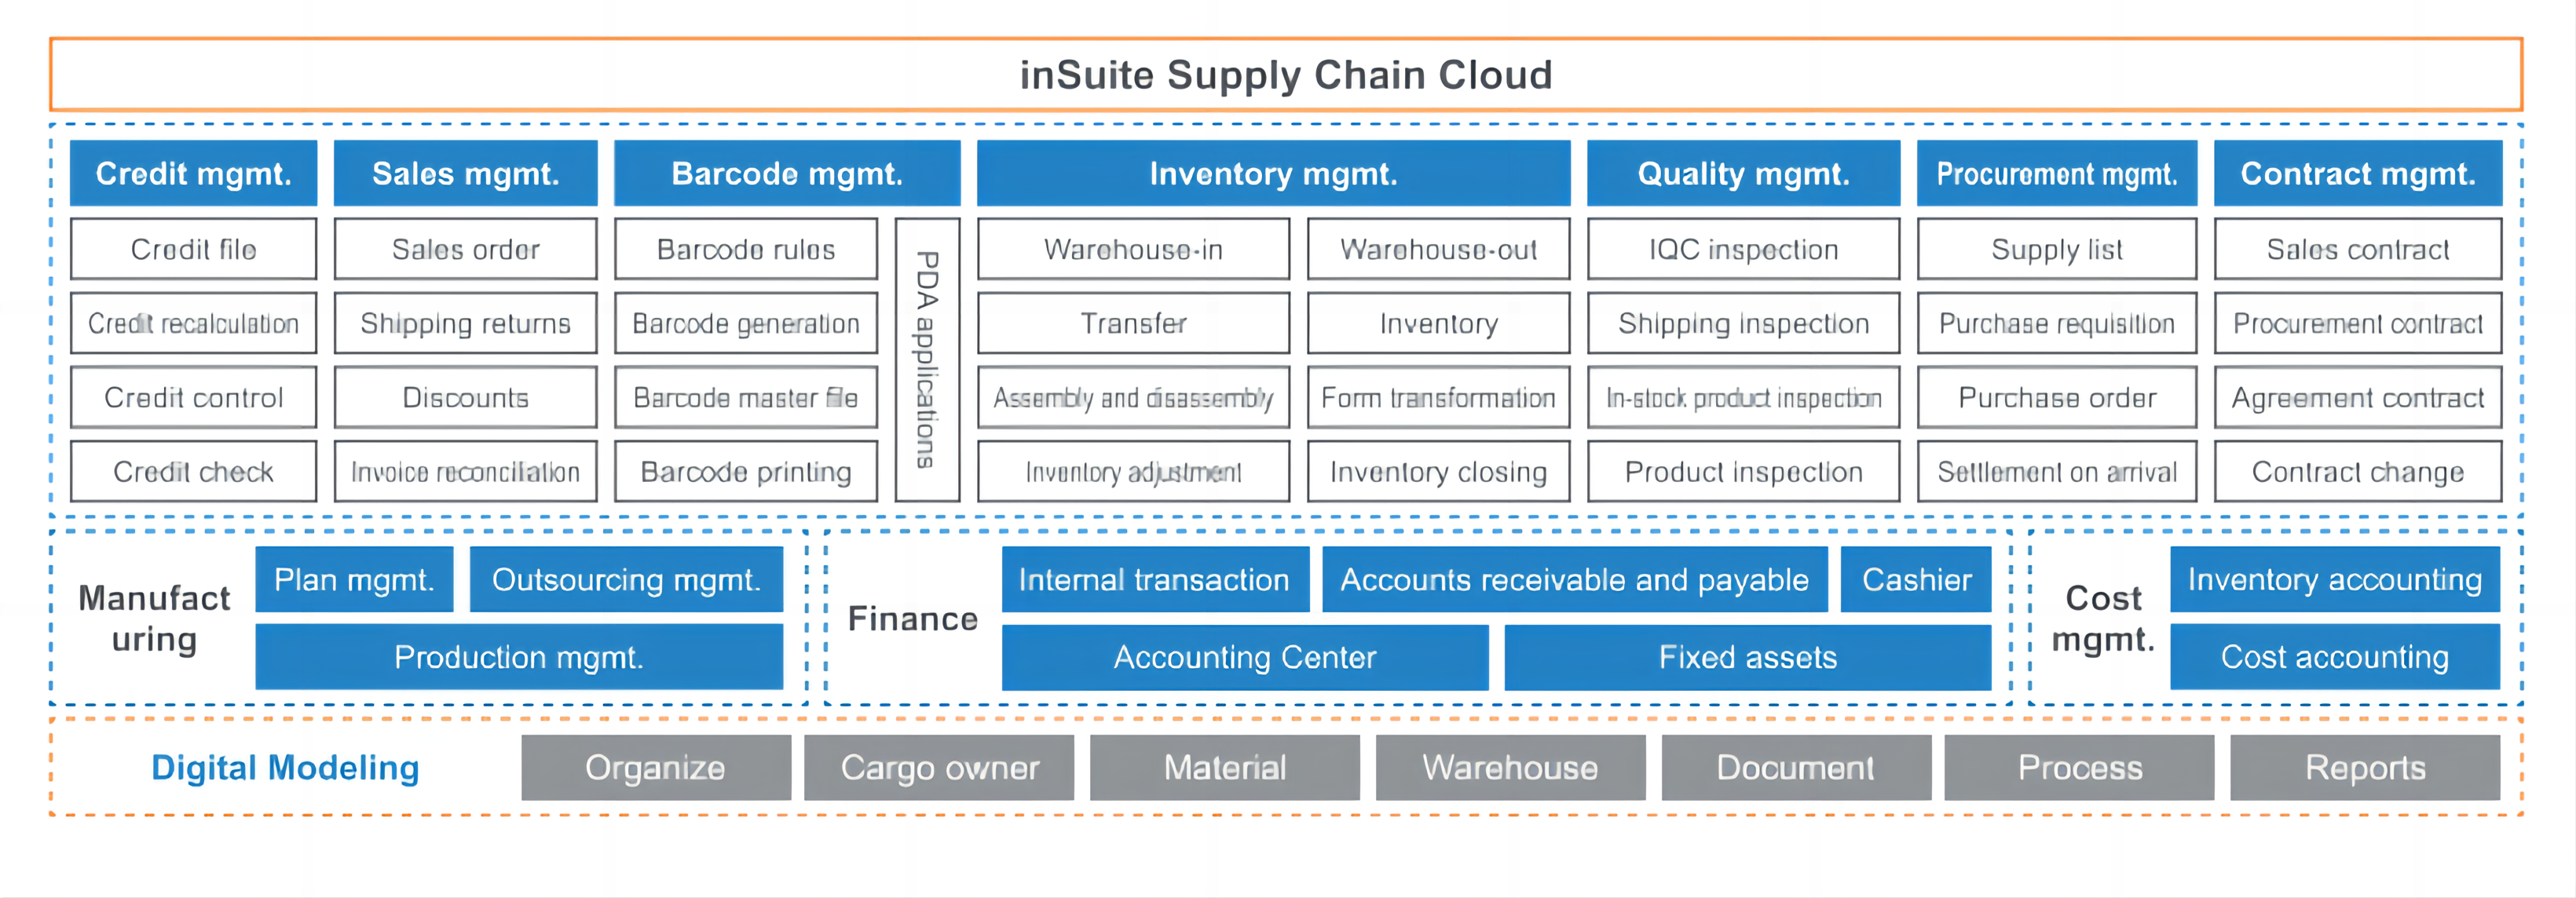 Inspur Haiyue inSuite Supply Chain Cloud Product Solutions